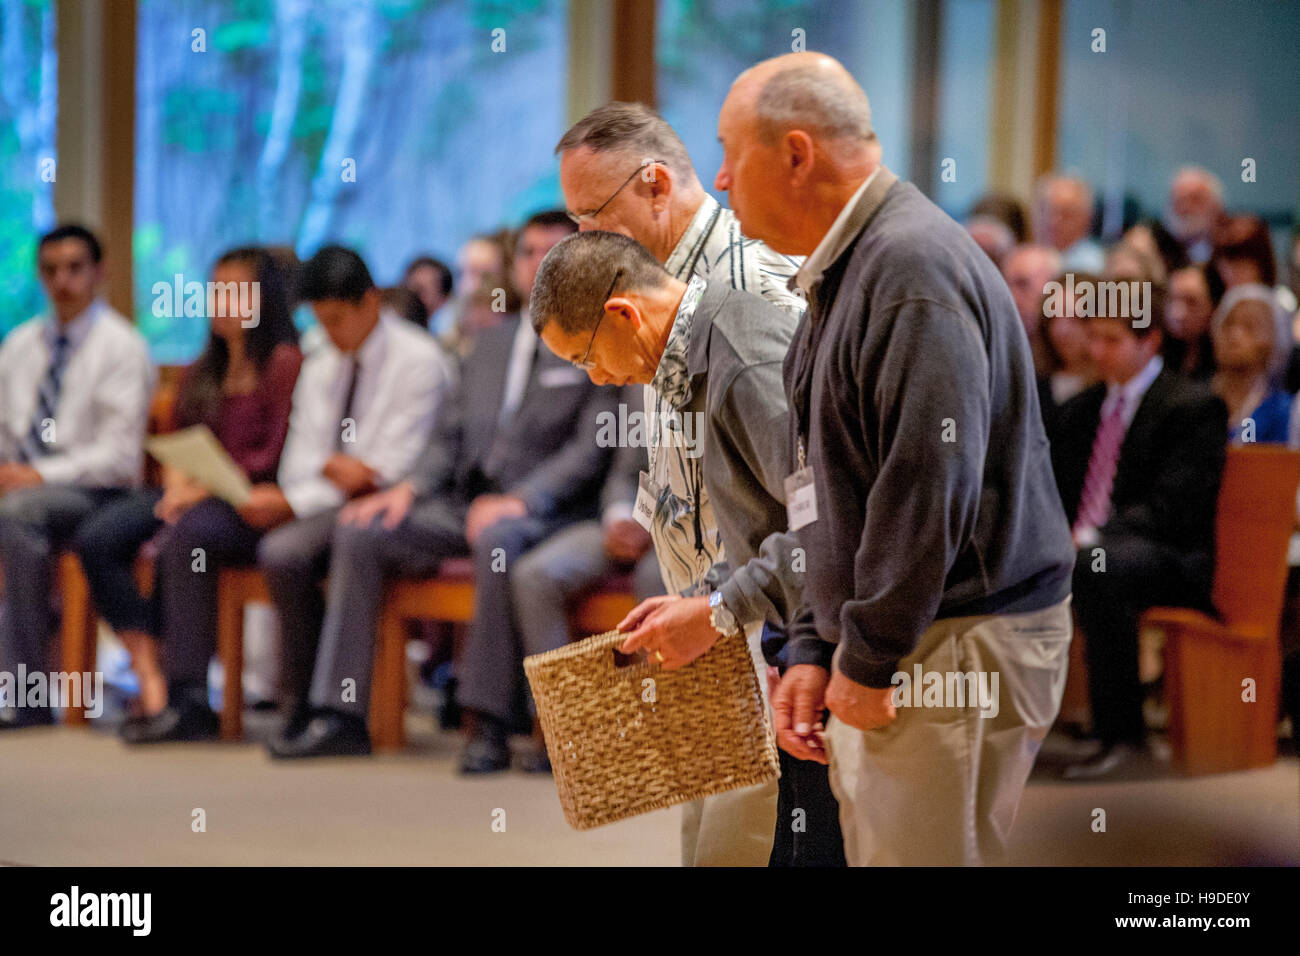 Elderly acolytes at a Catholic Church in Laguna Niguel, CA, bow as they bring filled collection baskets to a priest at the end of a mass. Stock Photo